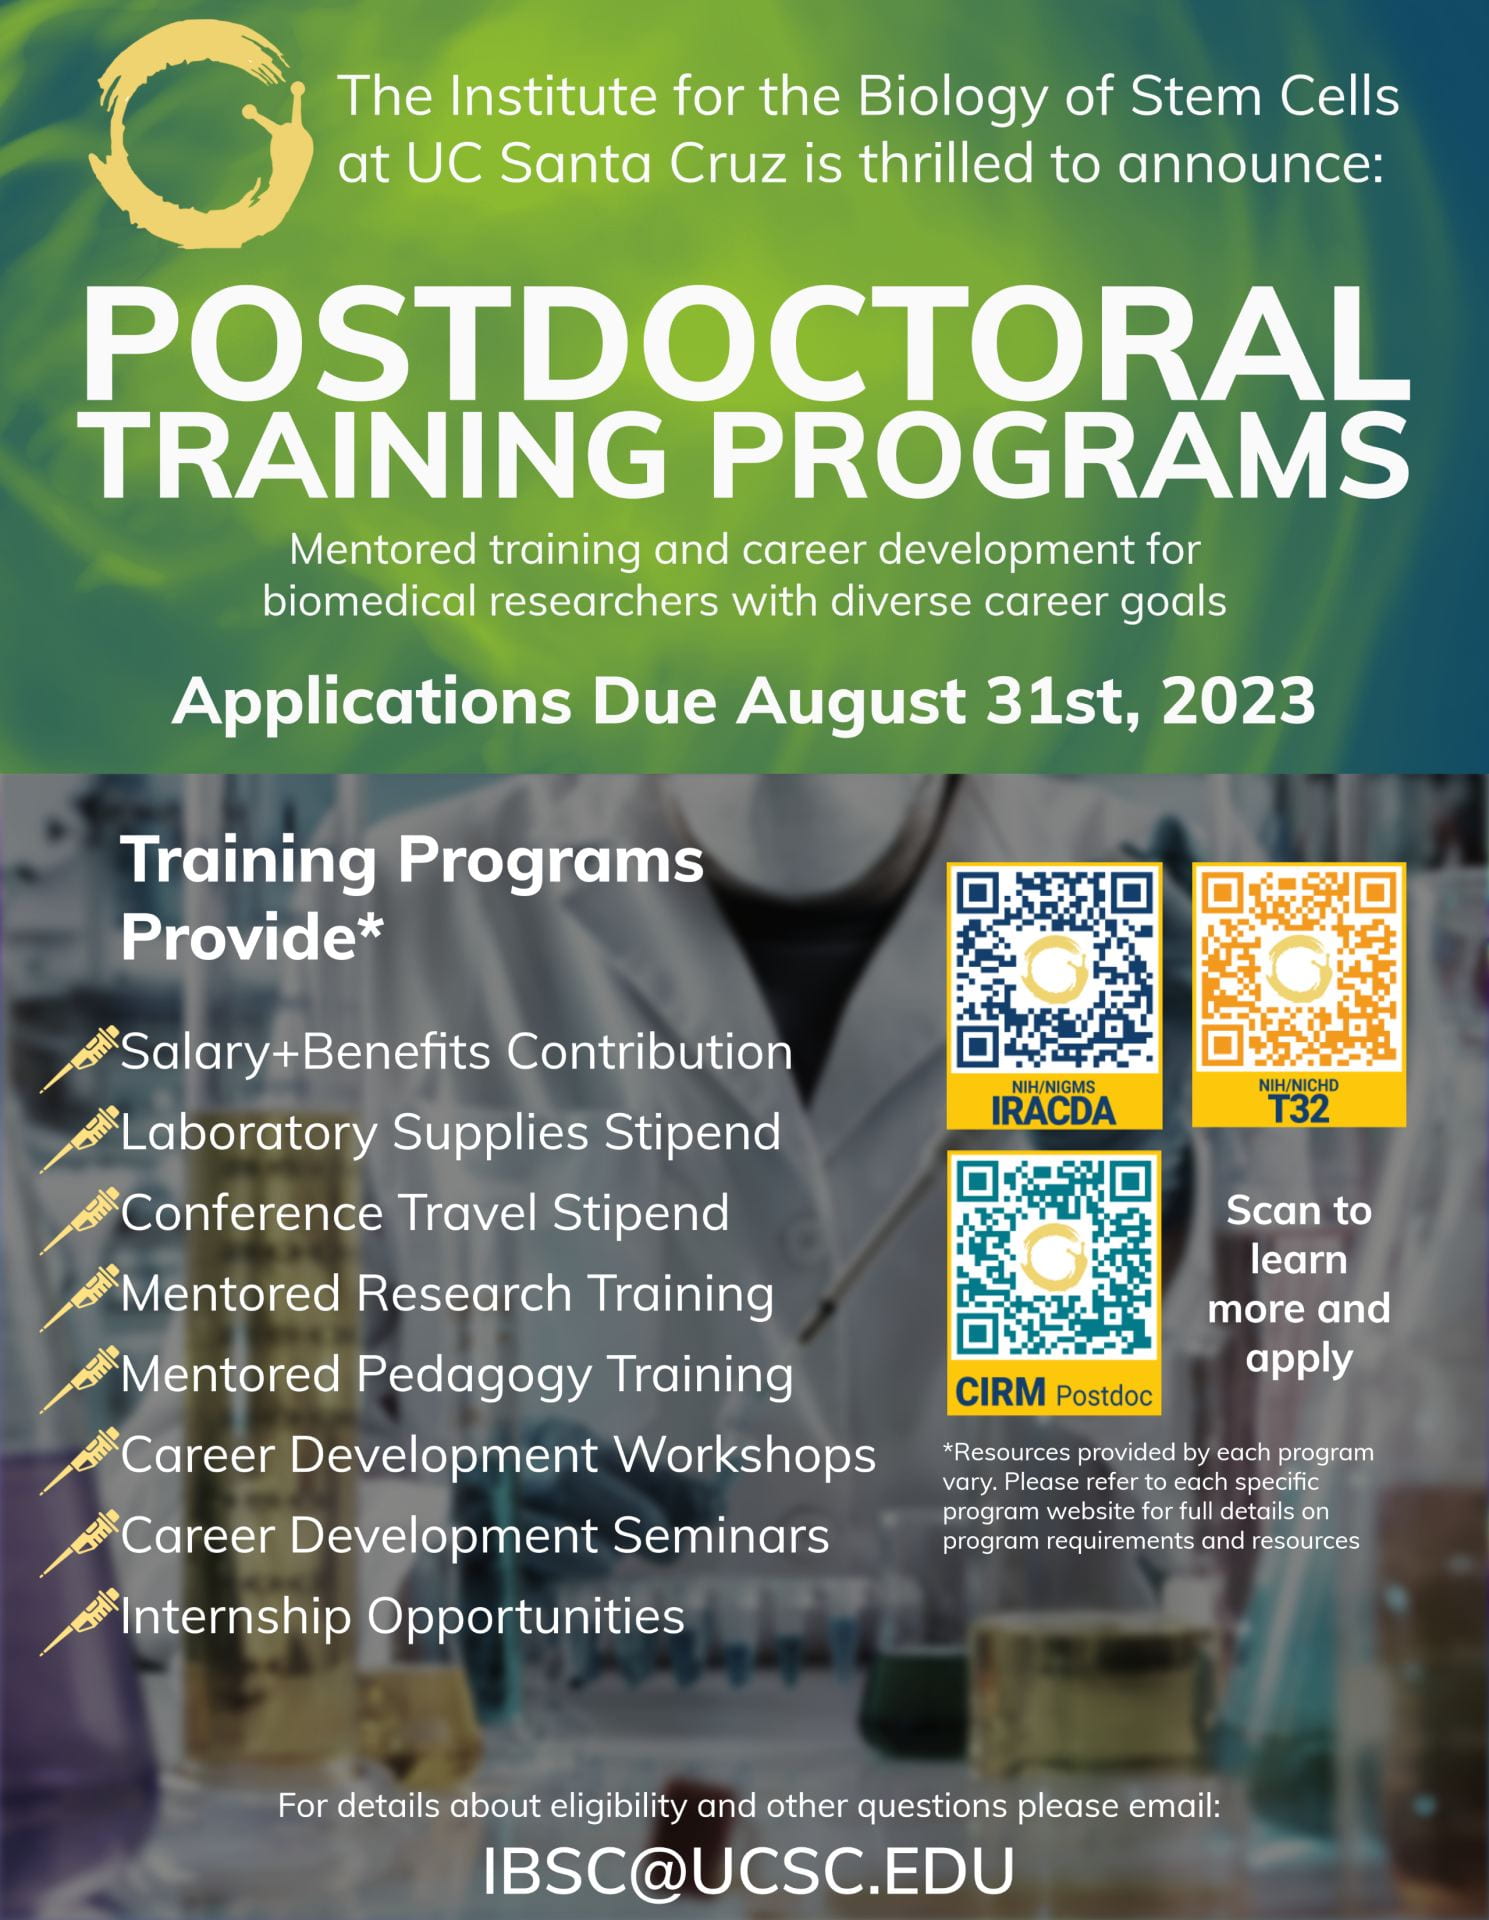 IBSC Postdoctoral Training Program Recruitment Flyer for IRACDA, CIRM, and T32